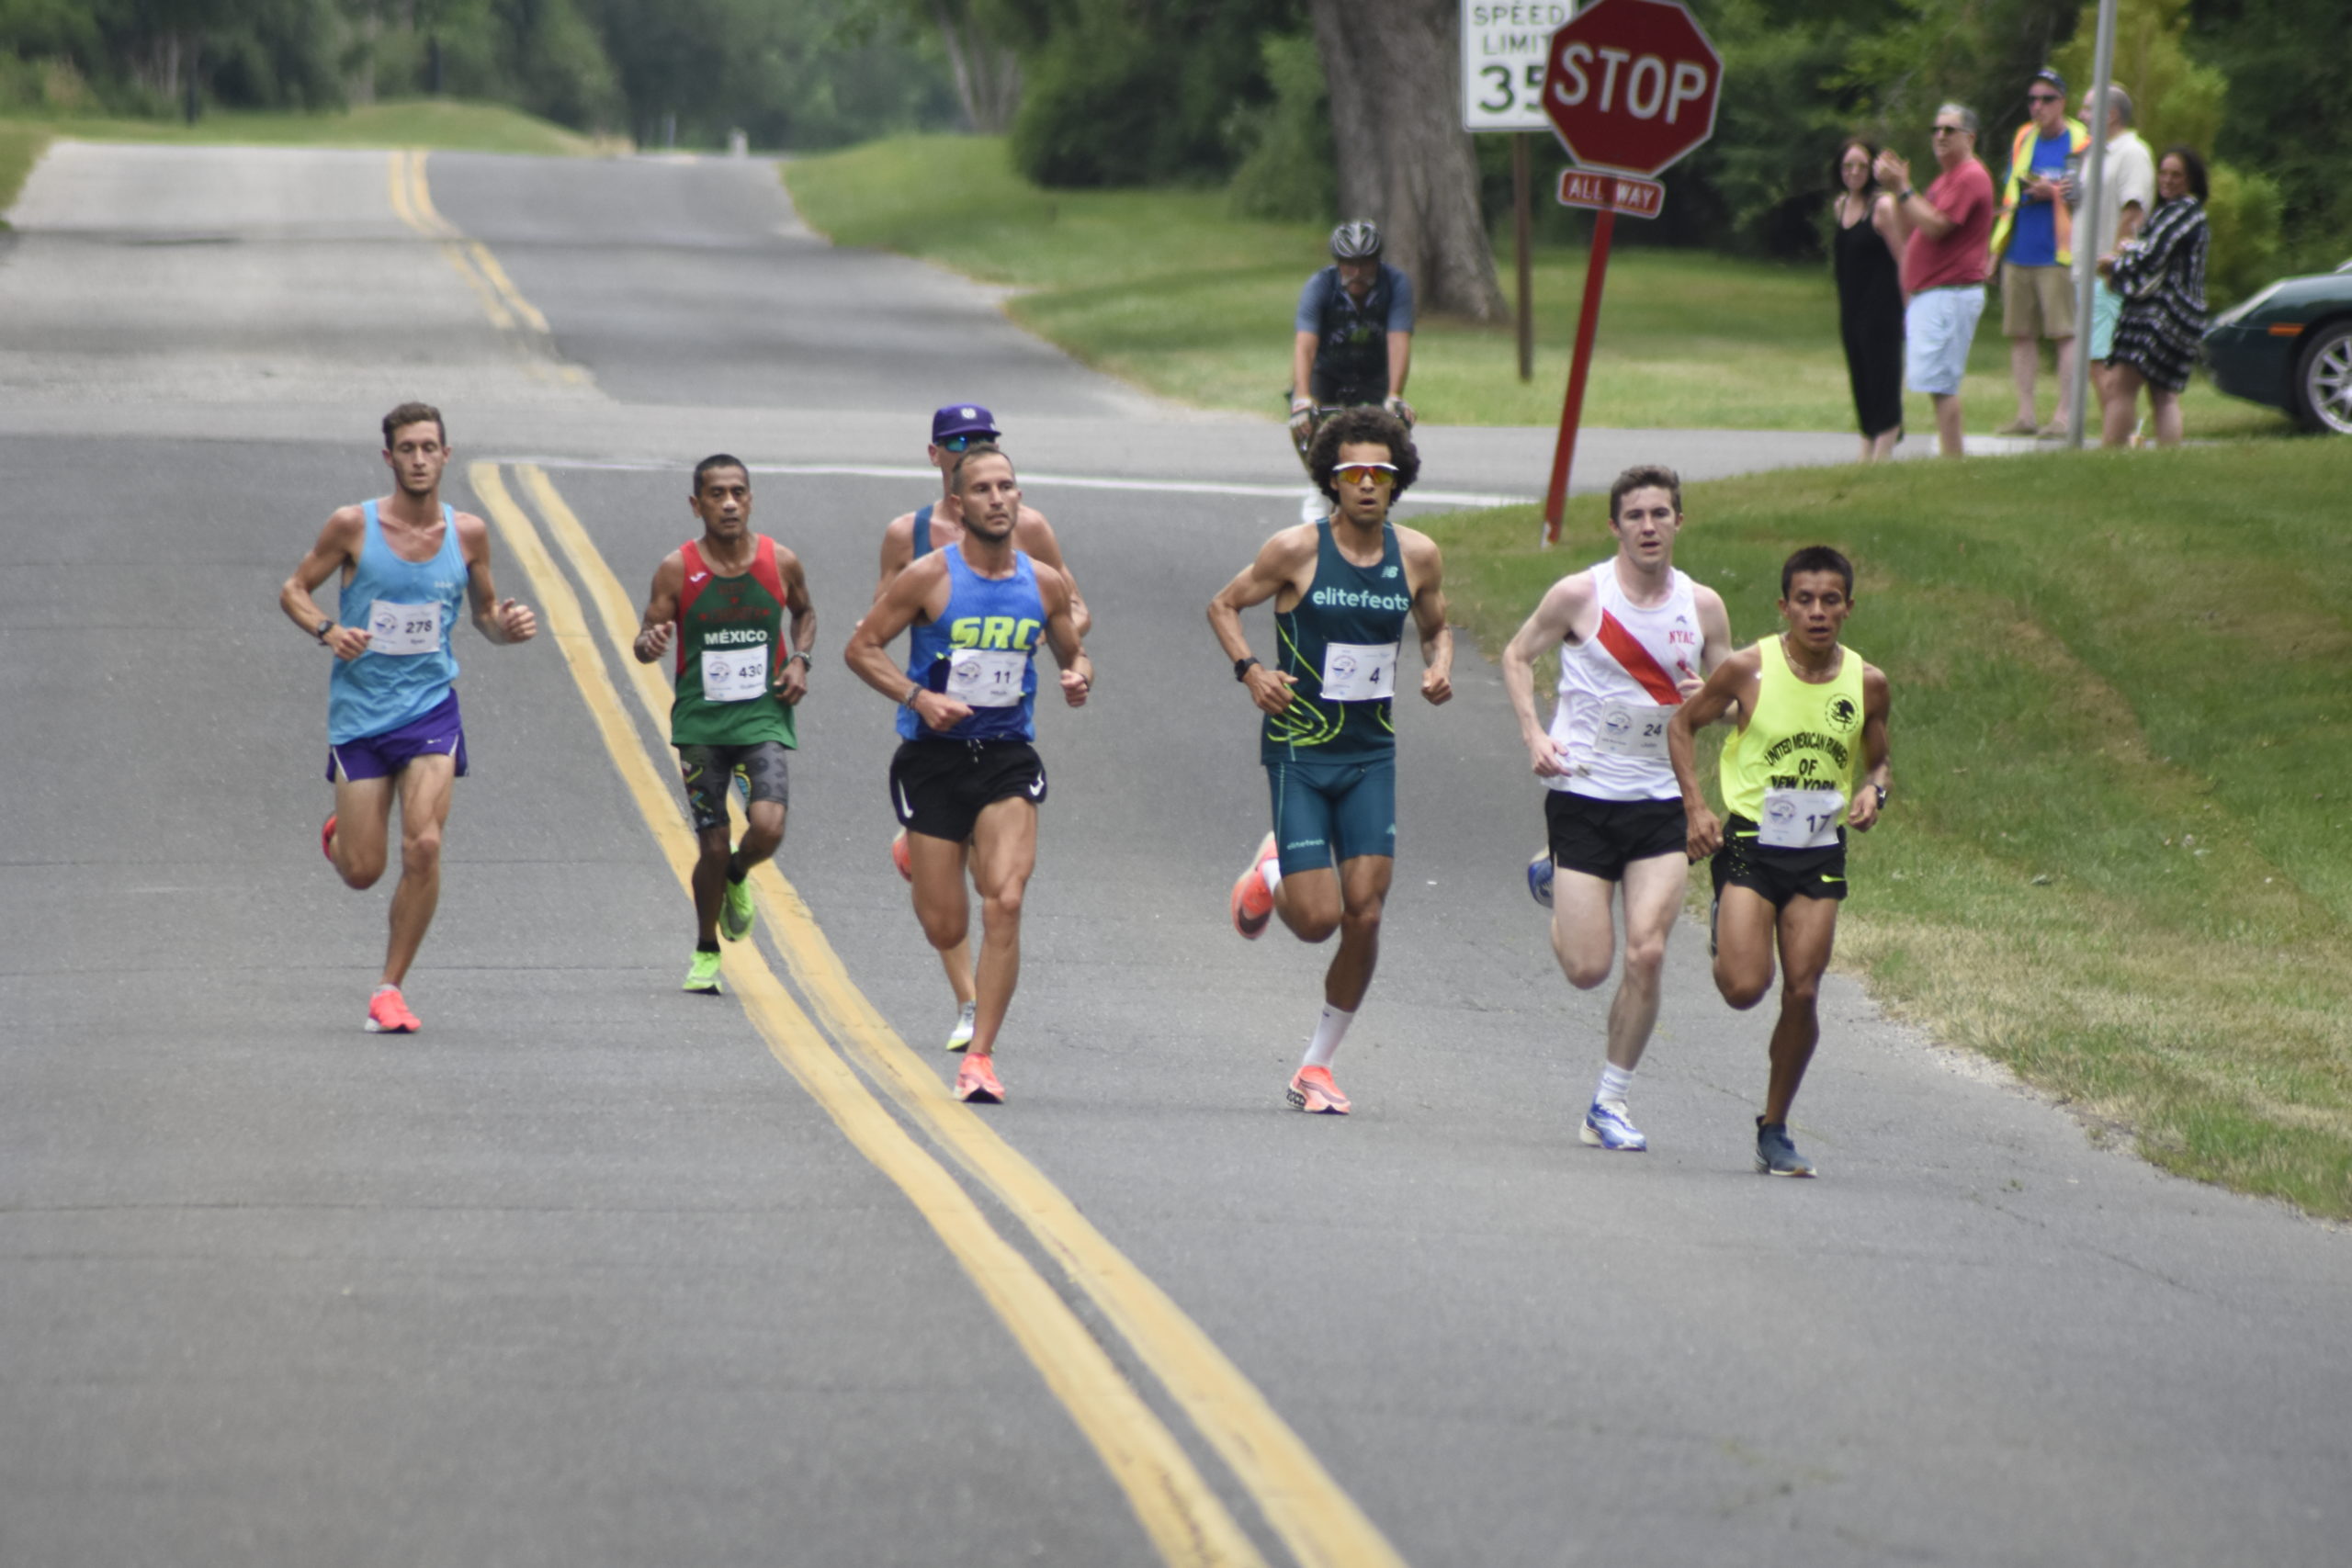 The same pack of runners stuck together through much of the race on Saturday.